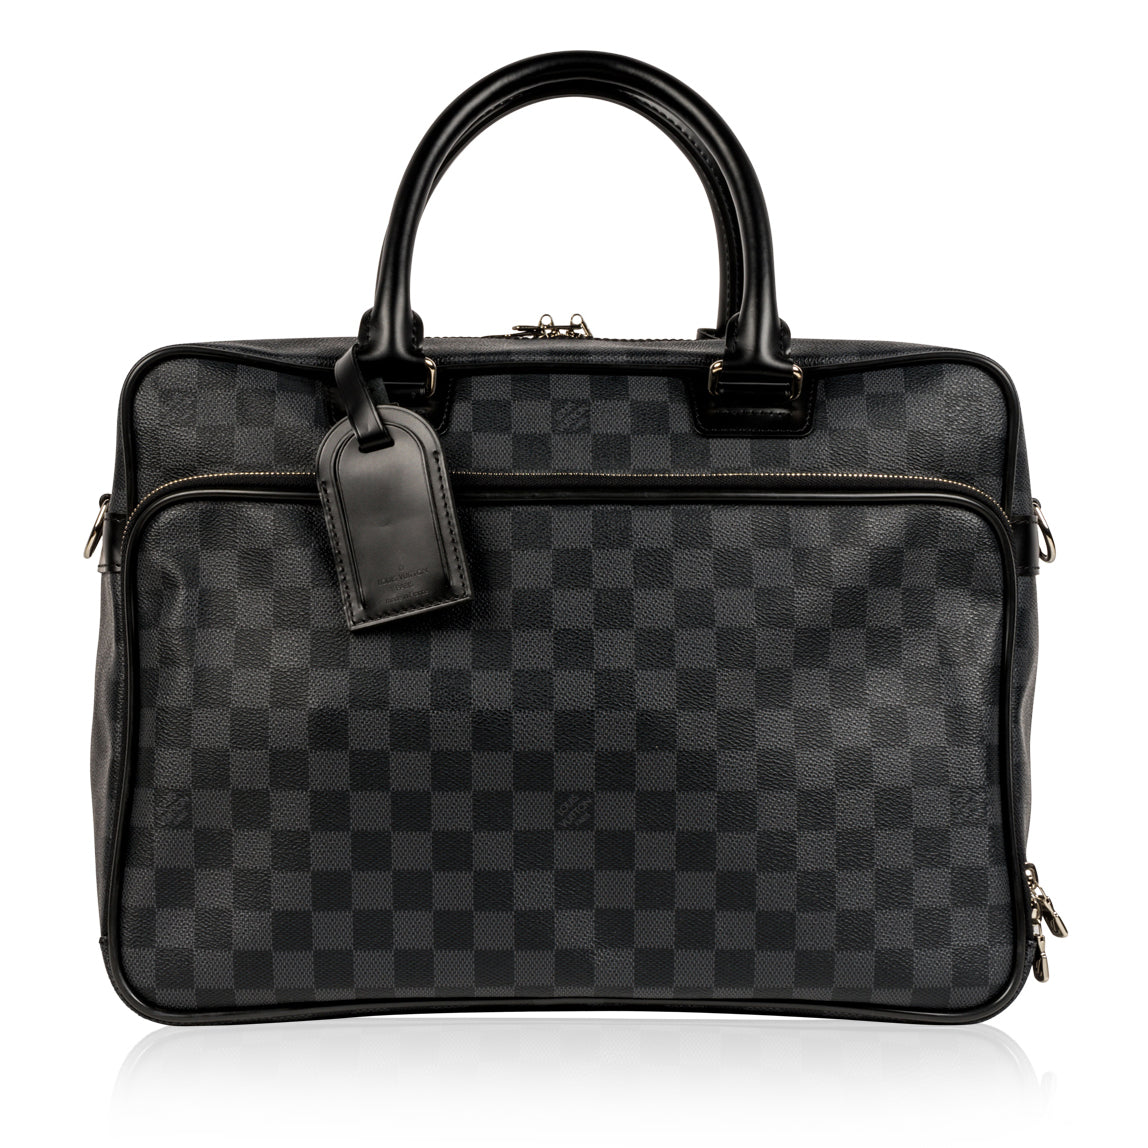 Louis Vuitton 2009 pre-owned Icare two-way Briefcase - Farfetch